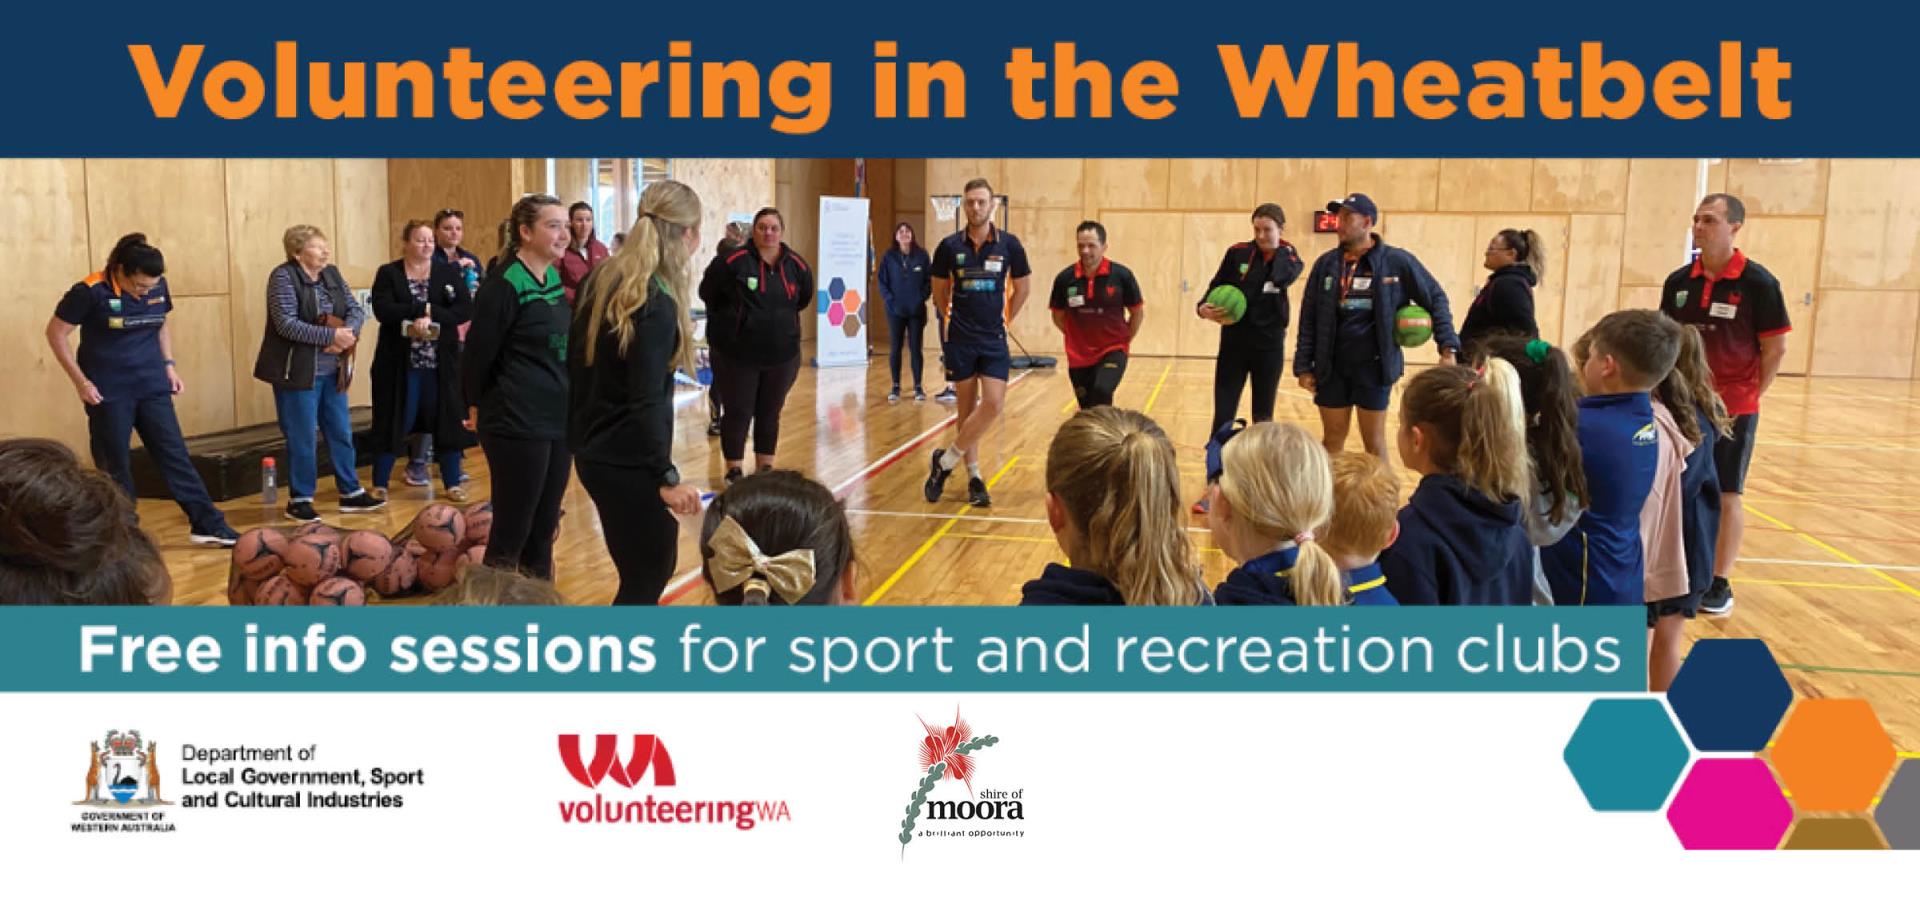 Volunteering in the Wheatbelt - free info session